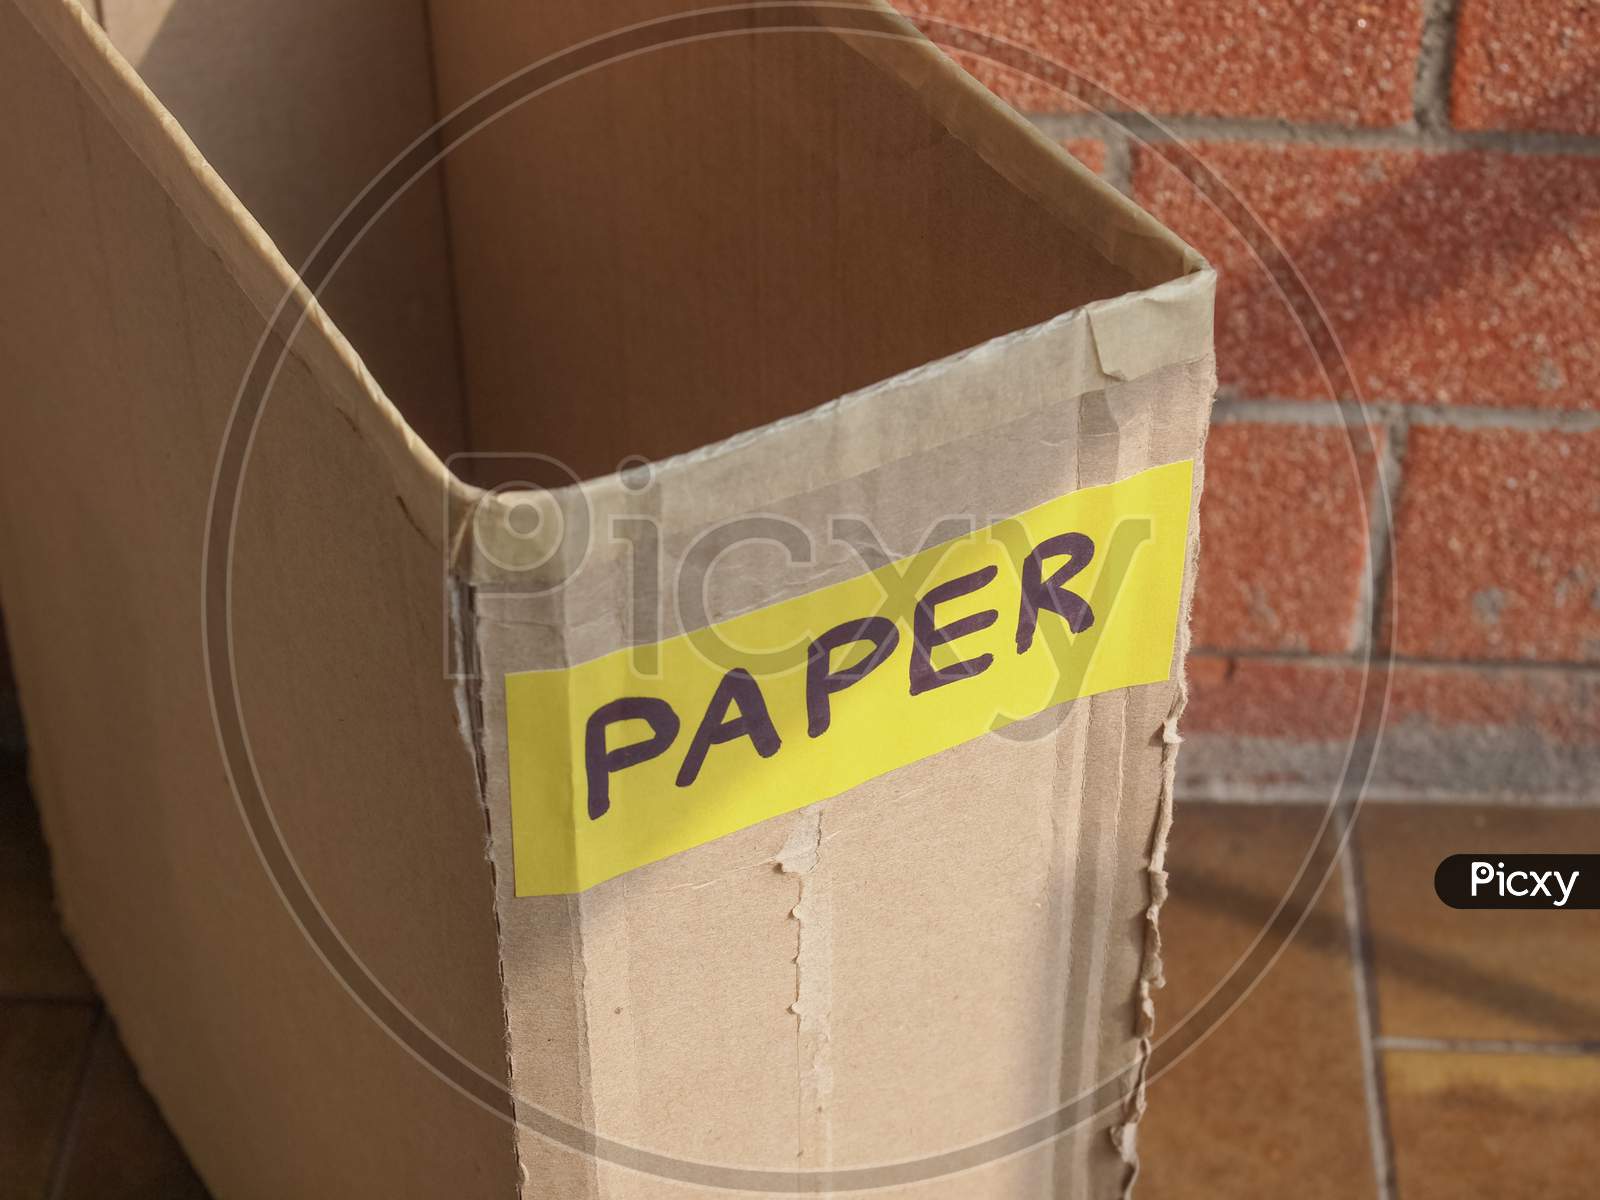 Waste Container For Paper